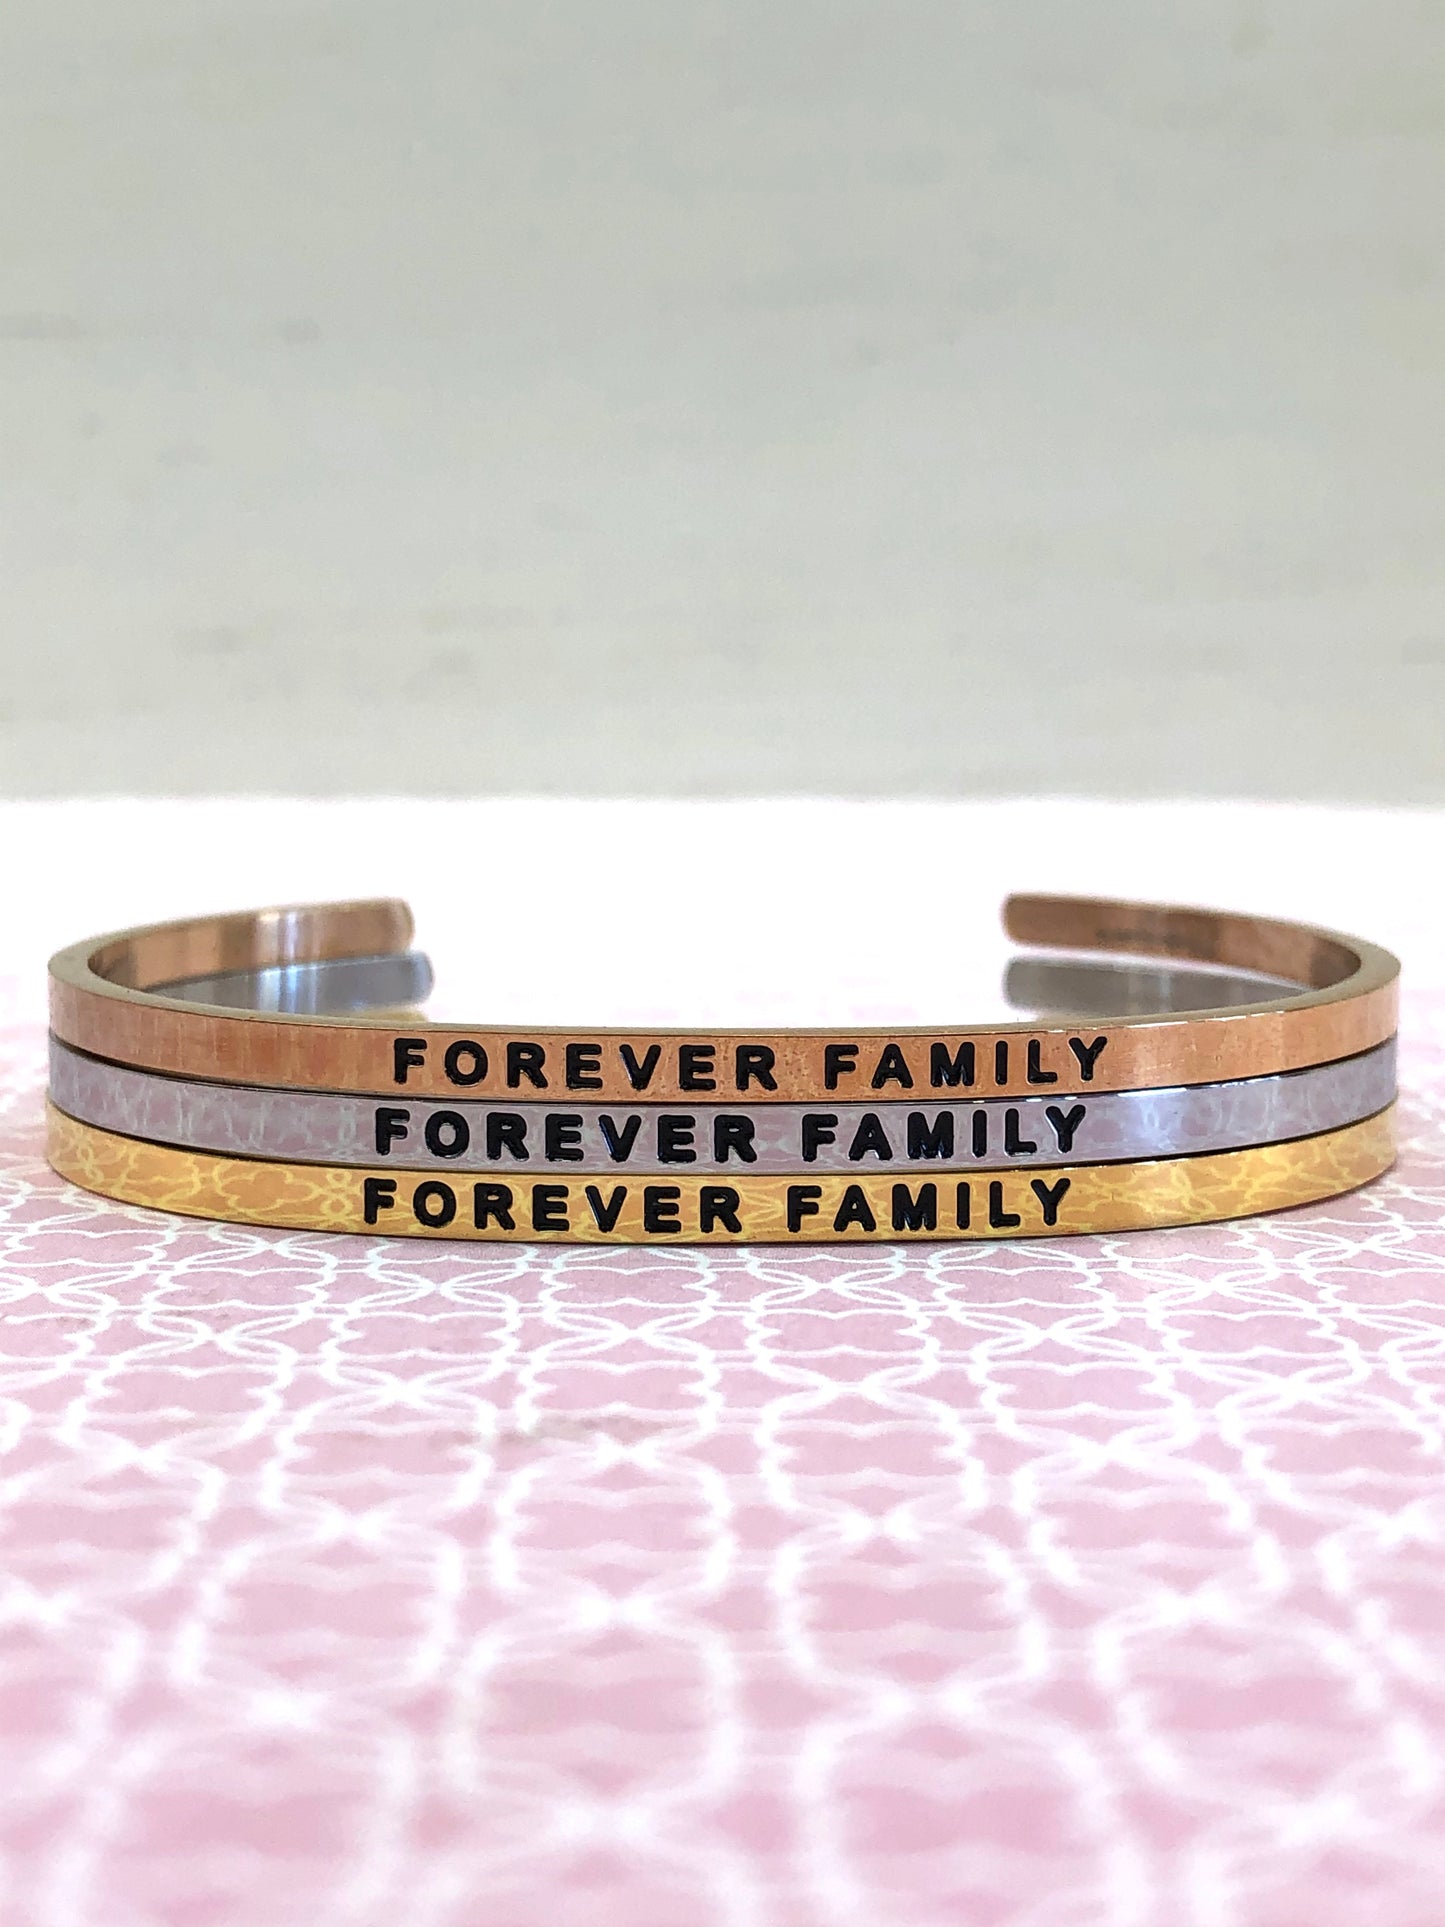 Forever Family MantraBand - Jewelry - SierraLily